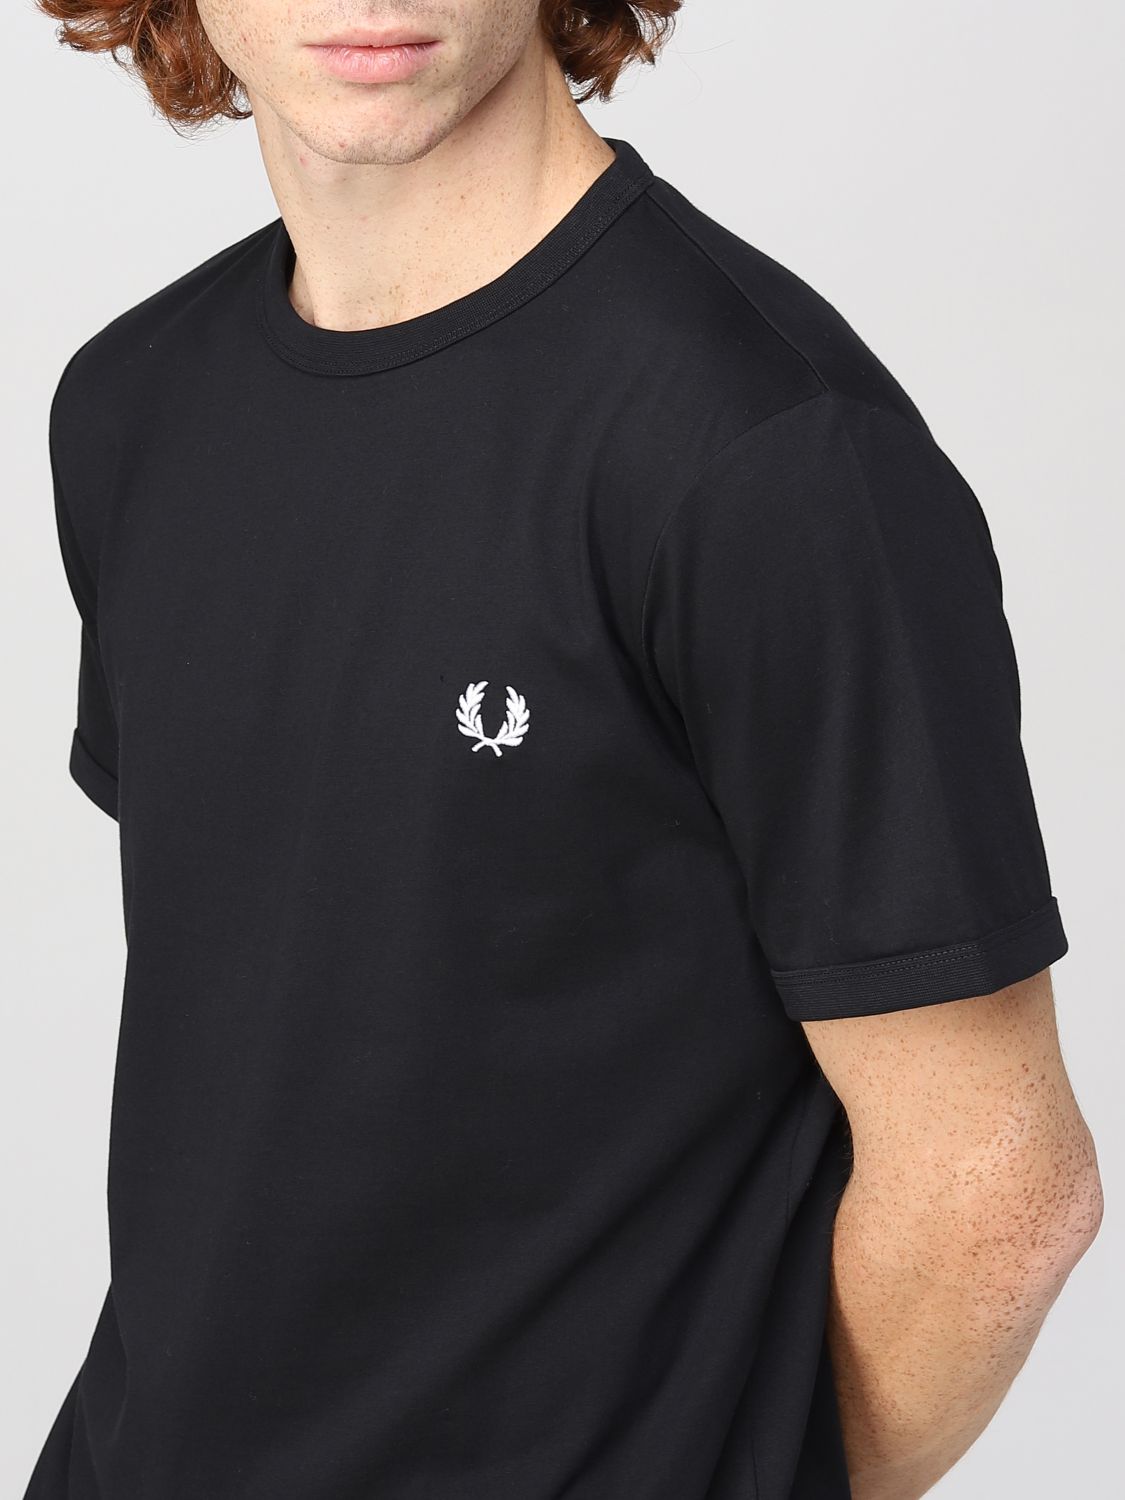 T-shirt Fred Perry: Fred Perry t-shirt for men black 3